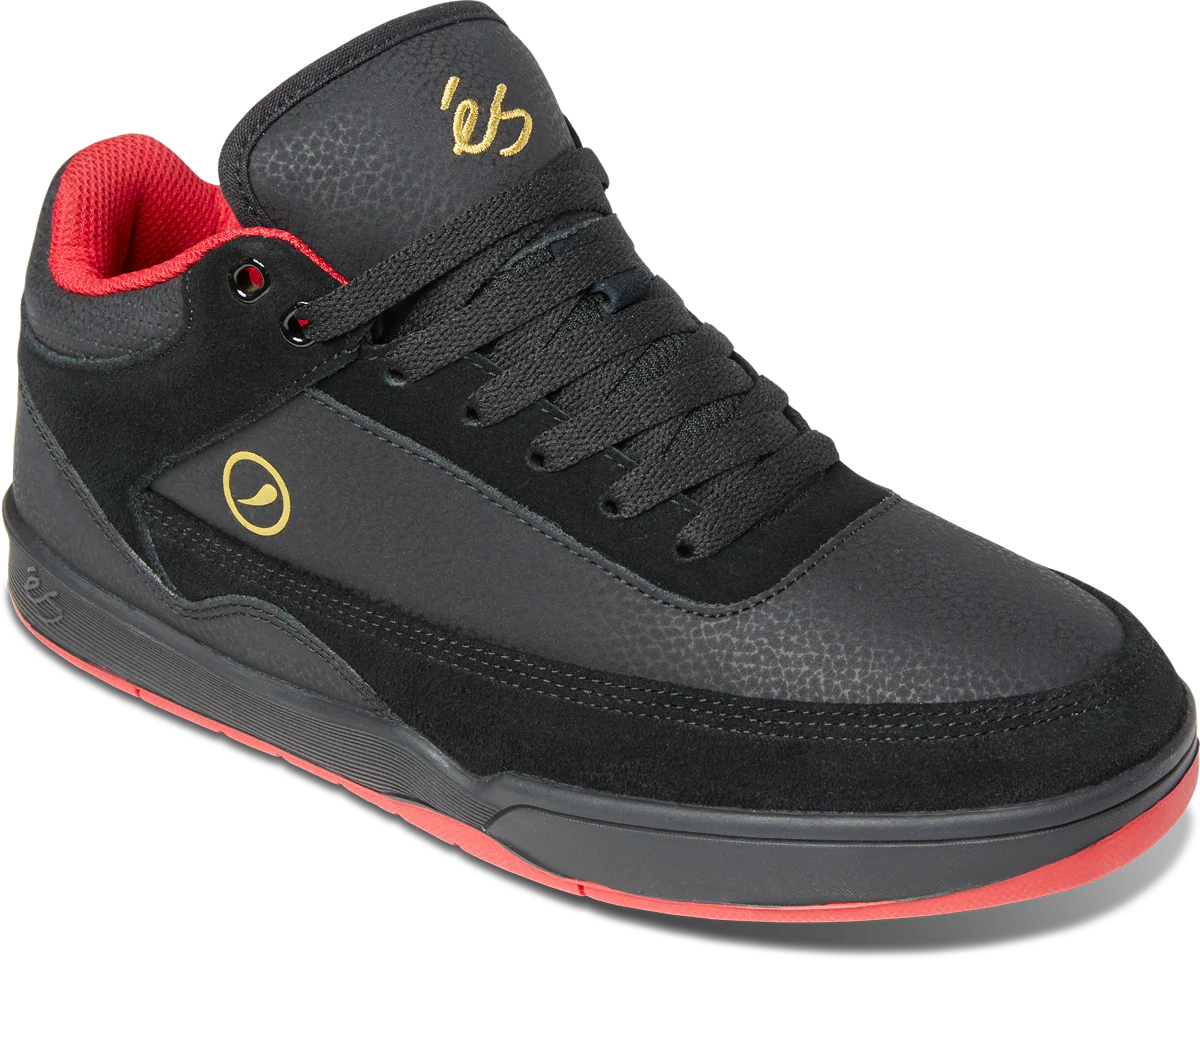 STYLUS MID X WADE DESARMO Pro Shoe Blk/Red(size options listed)